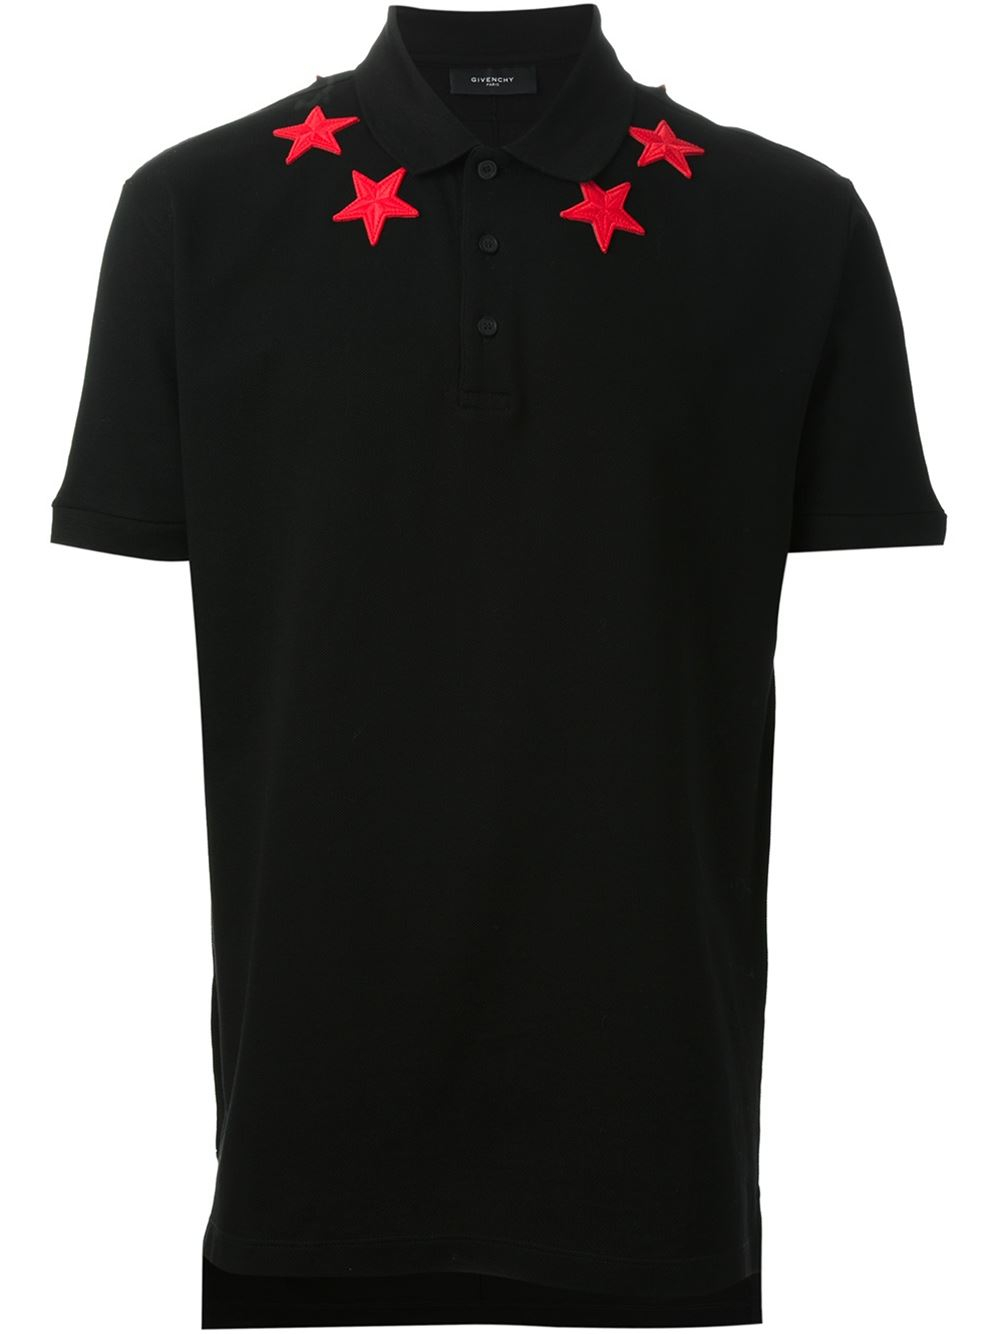 Lyst - Givenchy Embroidered Stars Polo Shirt in Black for Men